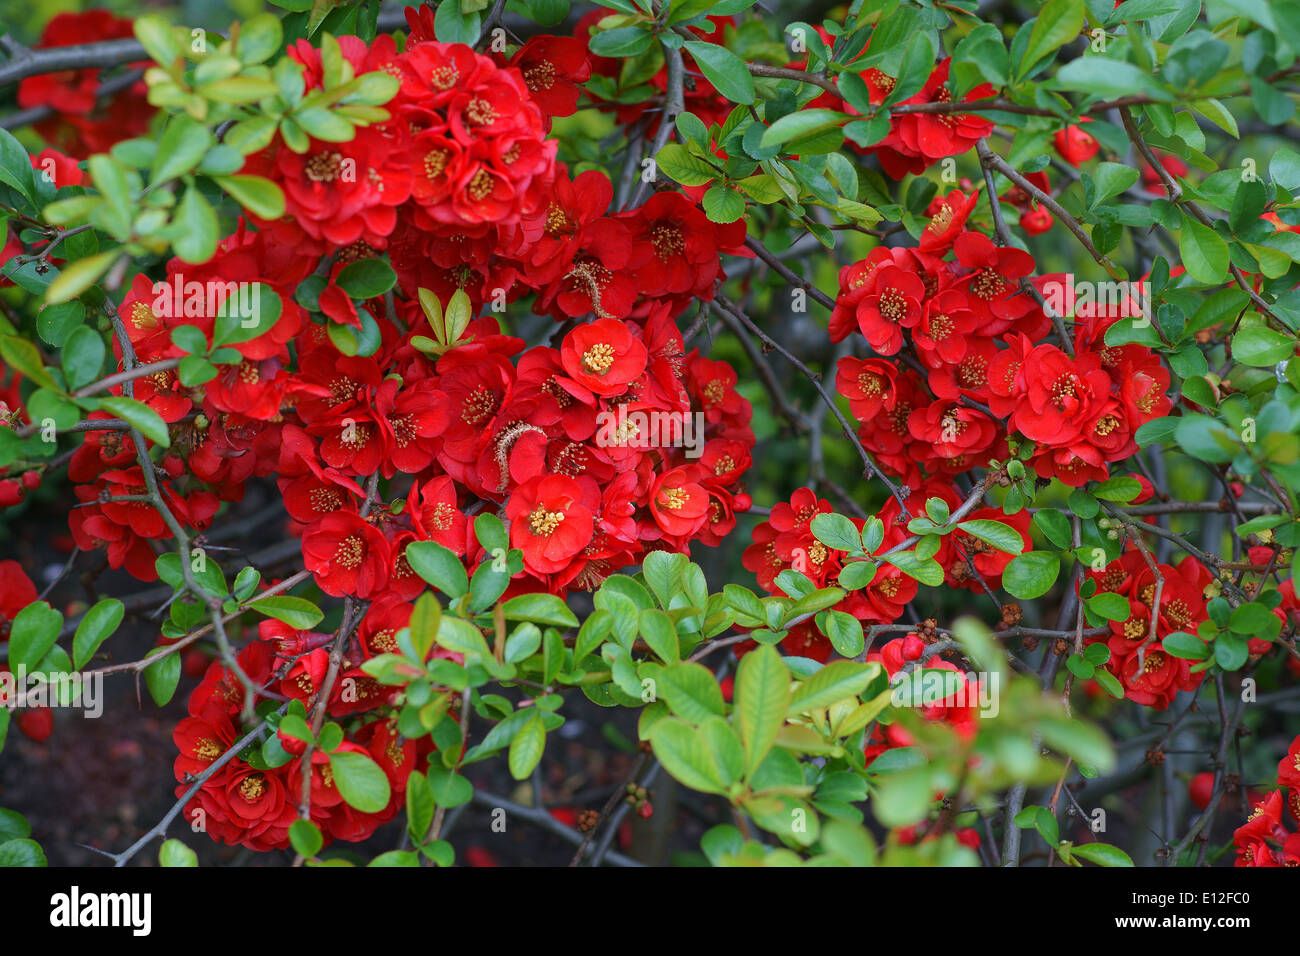 Japanese quince red blossom Chaenomeles superba Stock Photo